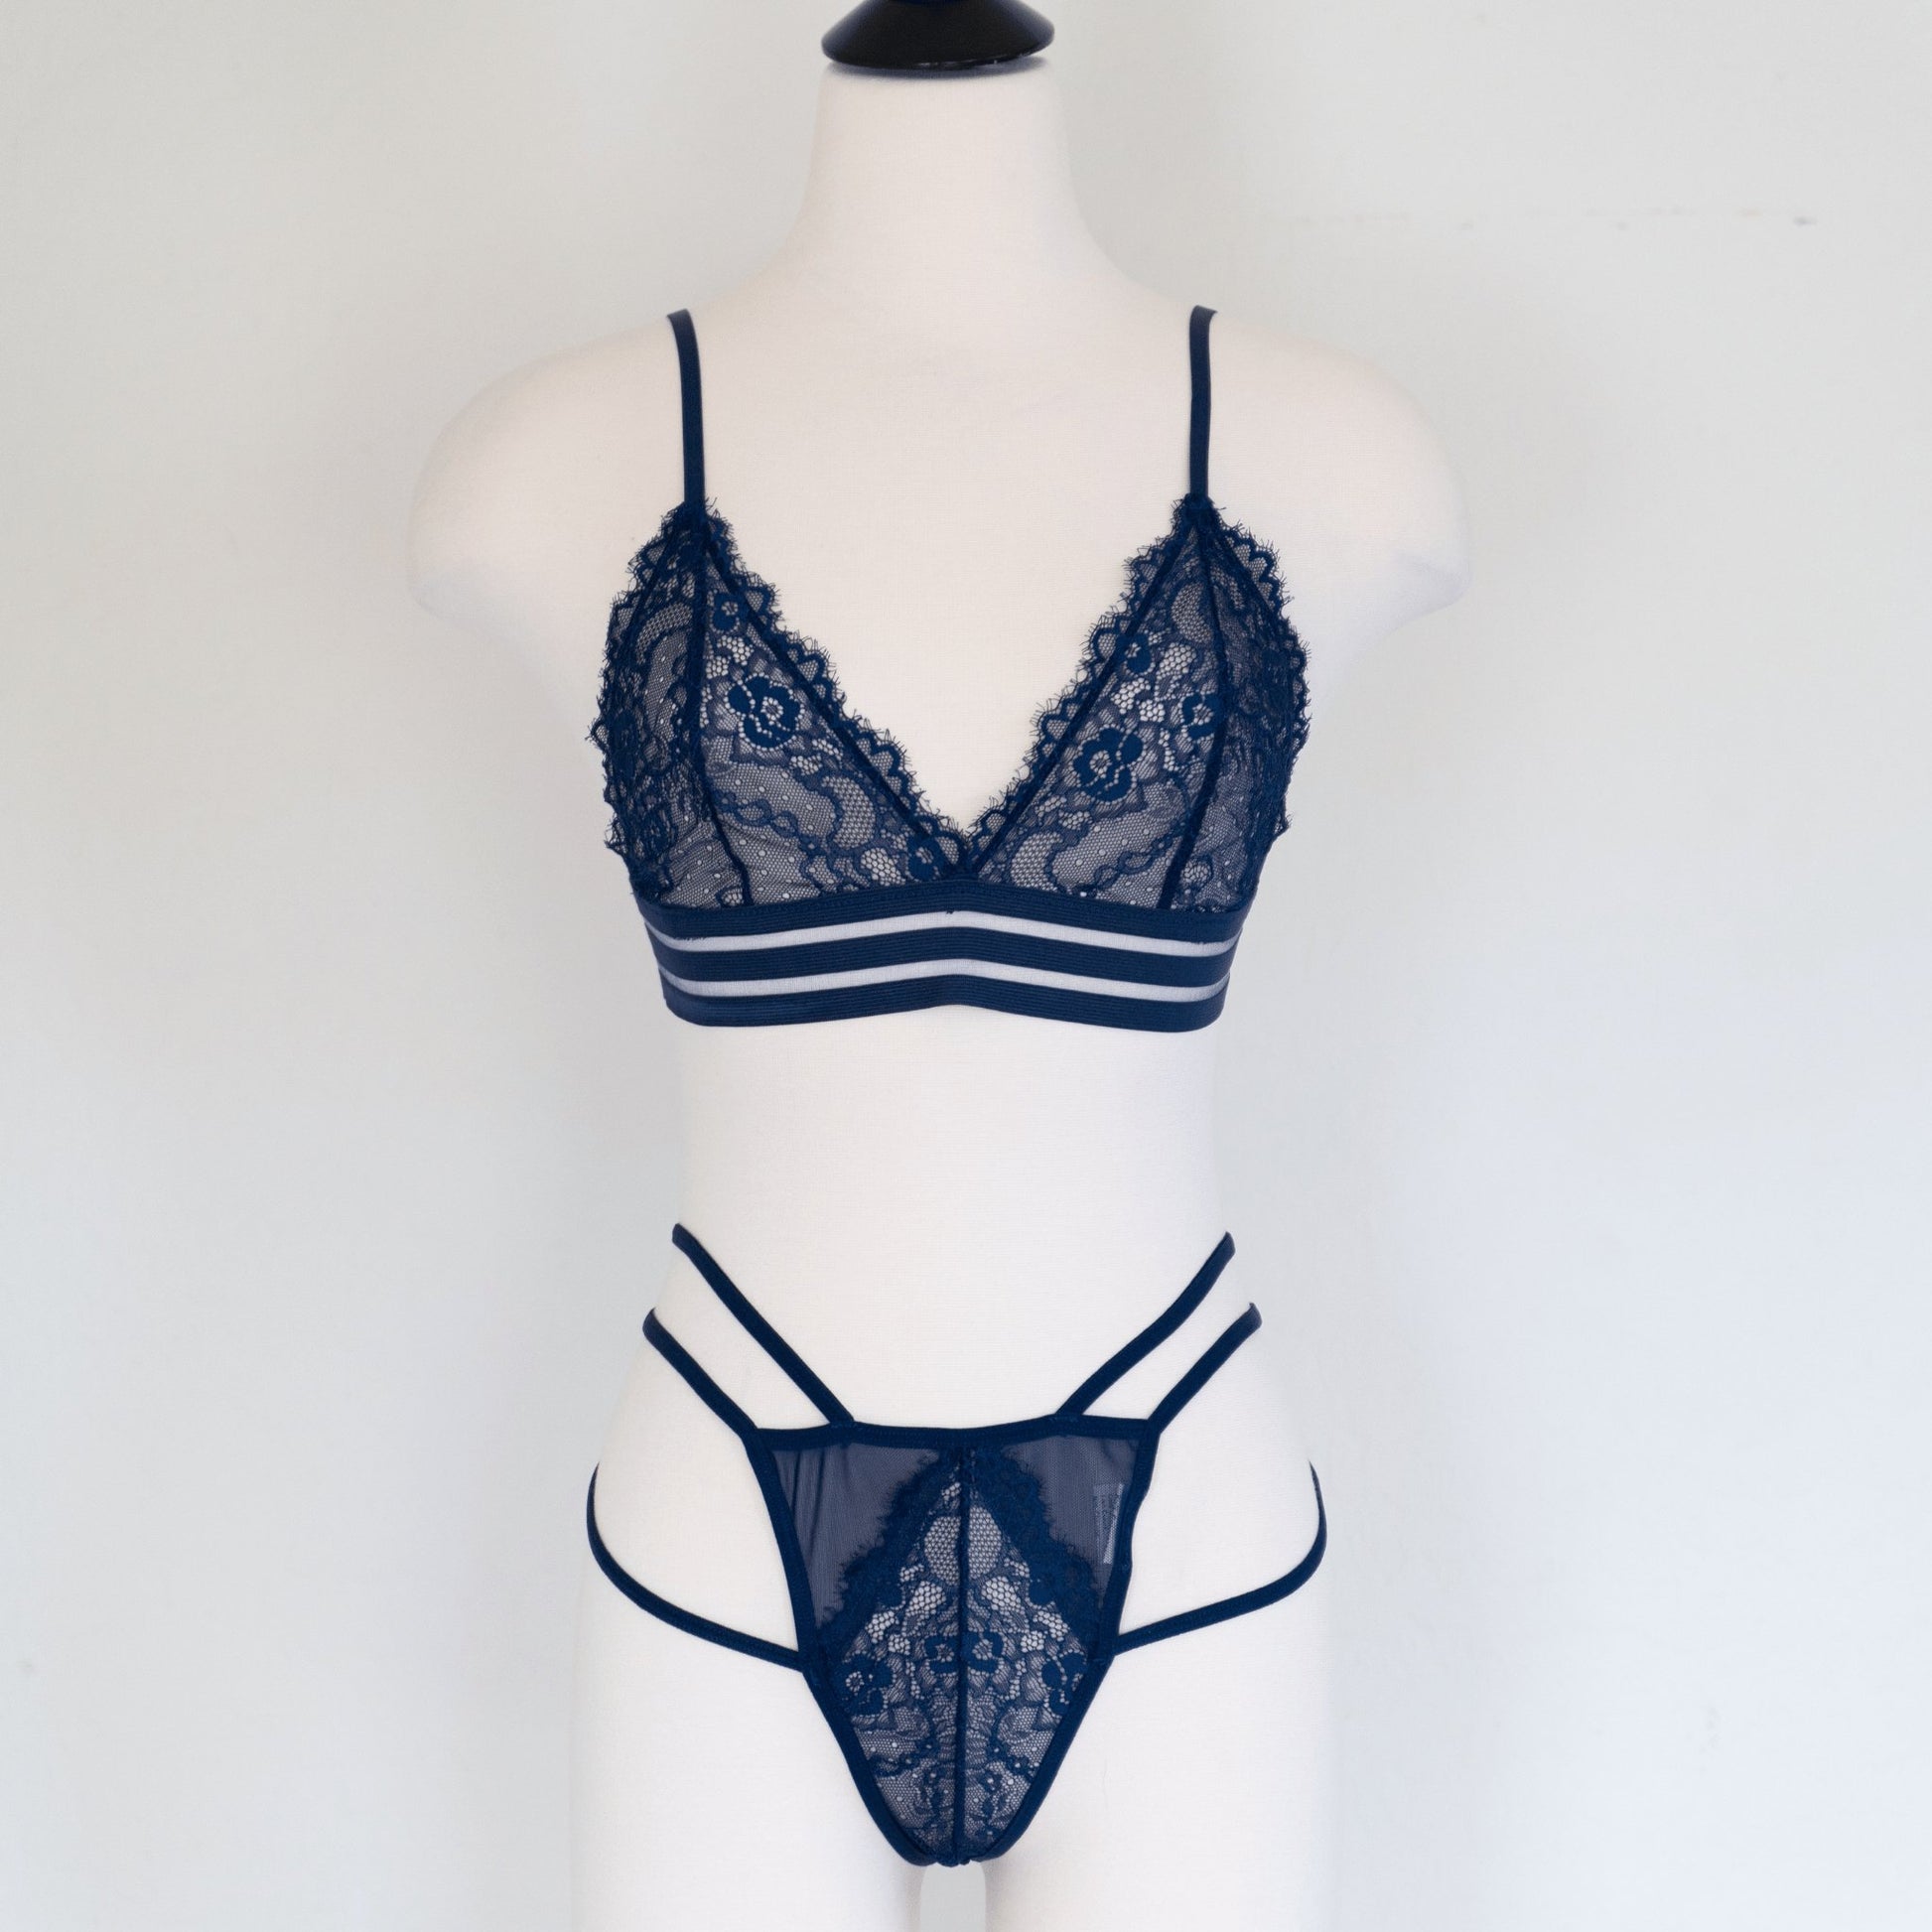 EveryLove Intimates Lingerie Subscription